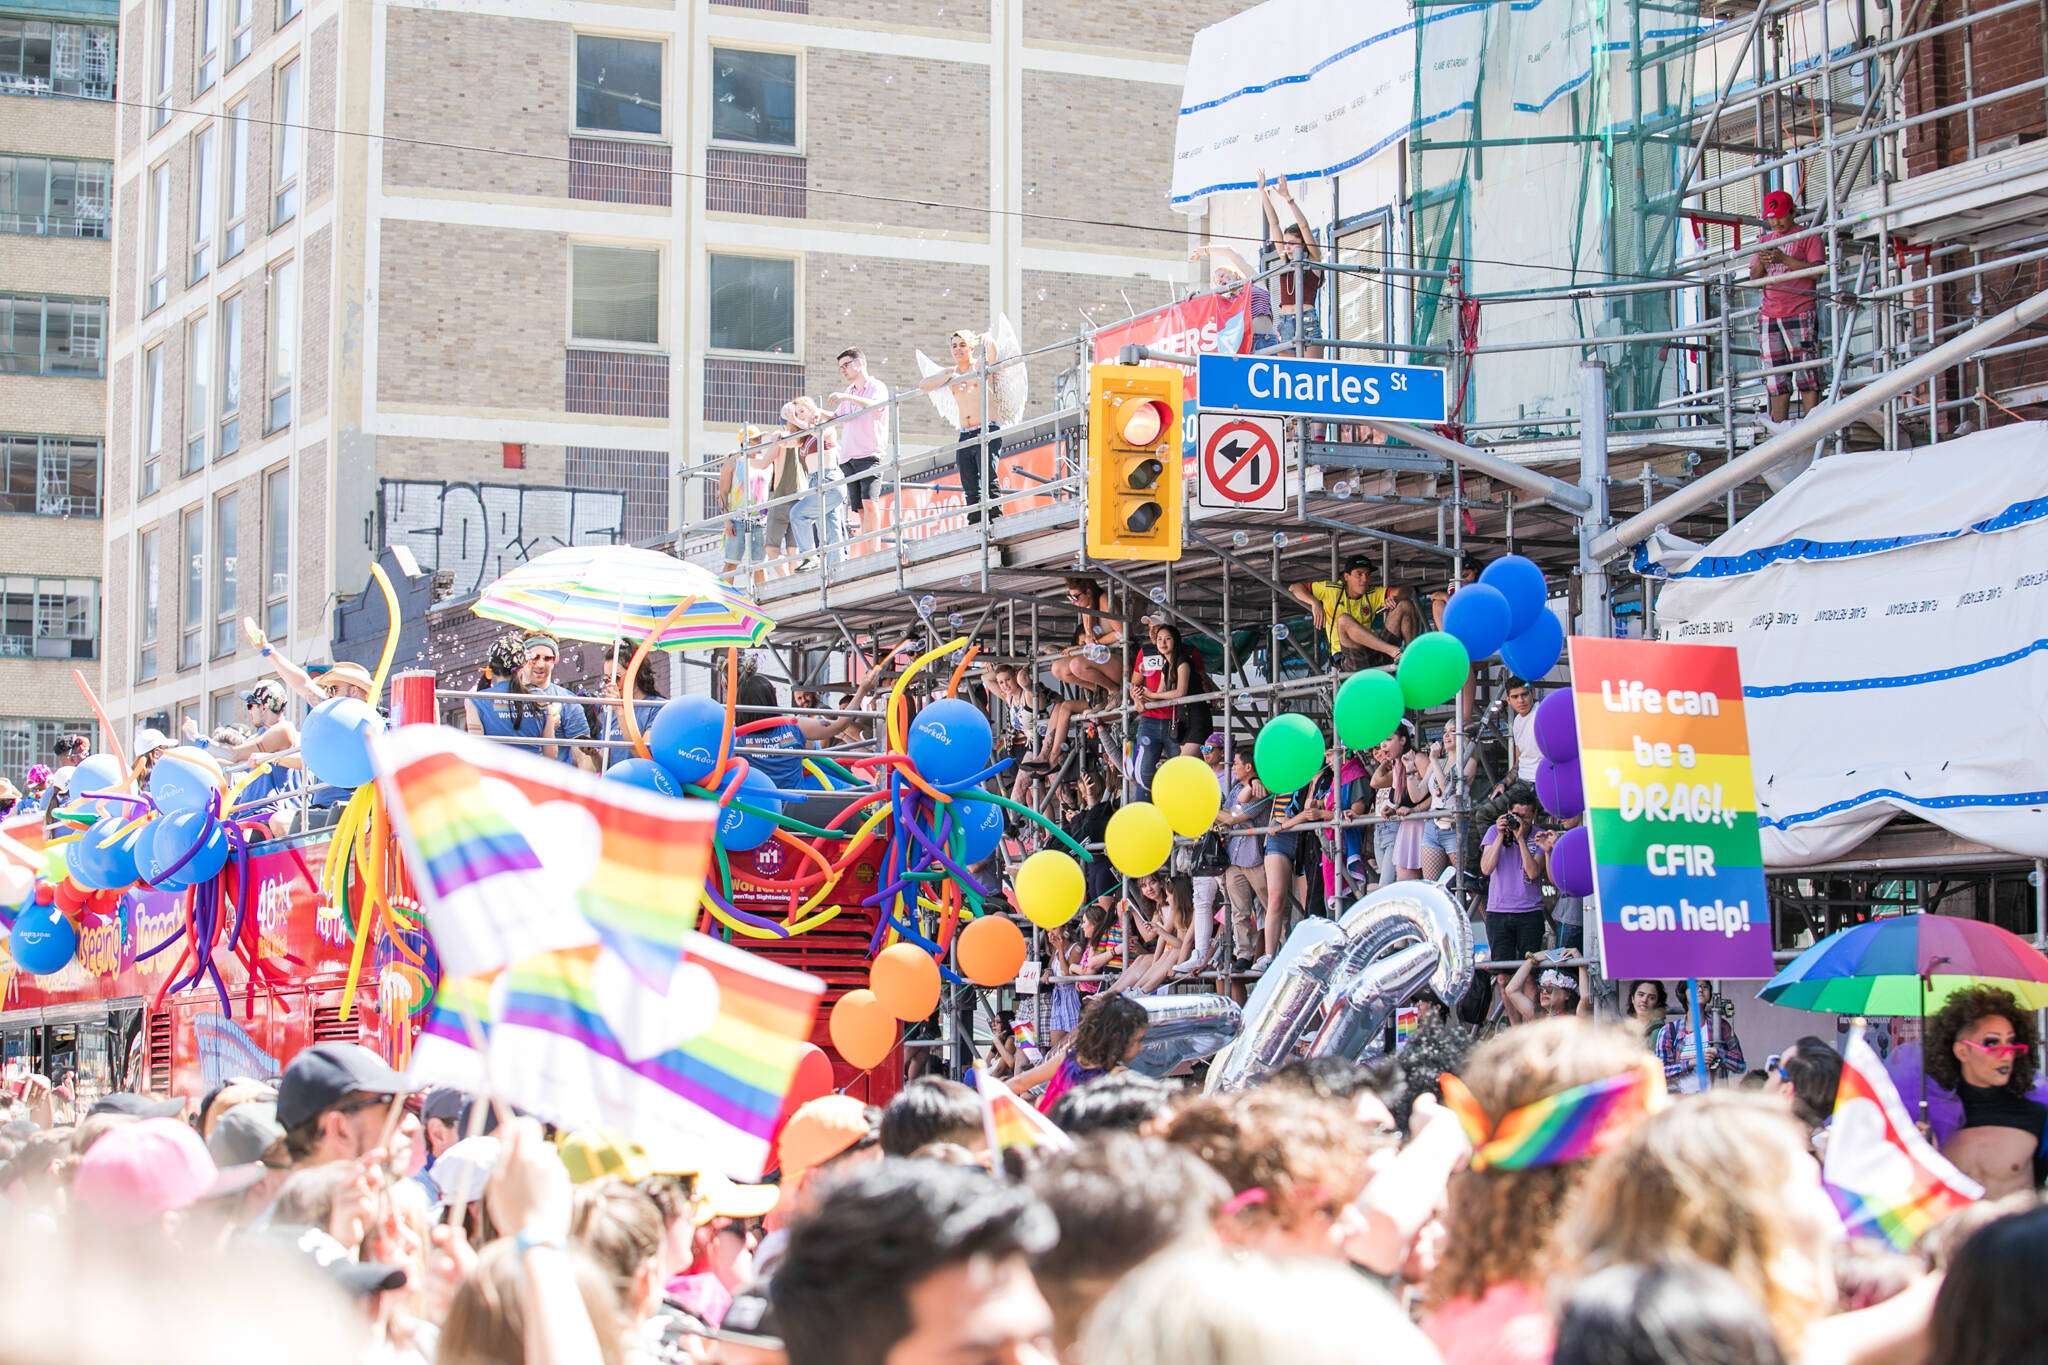 Toronto Pride Parade is finally returning in 2022 after two year hiatus